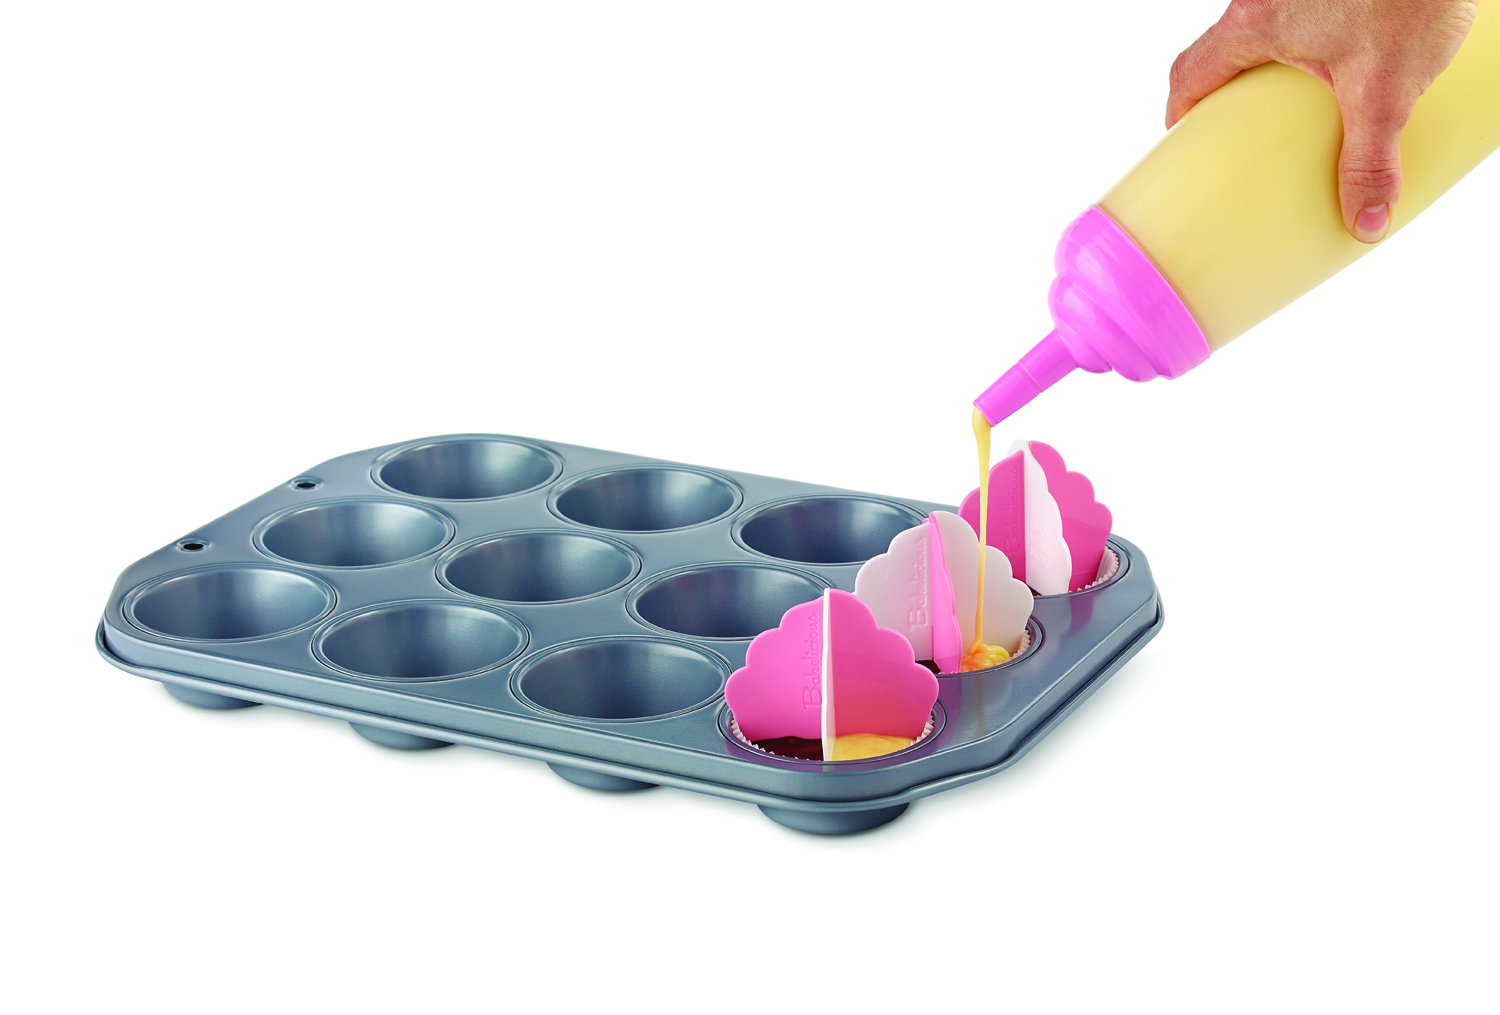 Six Baking Gadgets to Try Now - Kitchenware News & Housewares